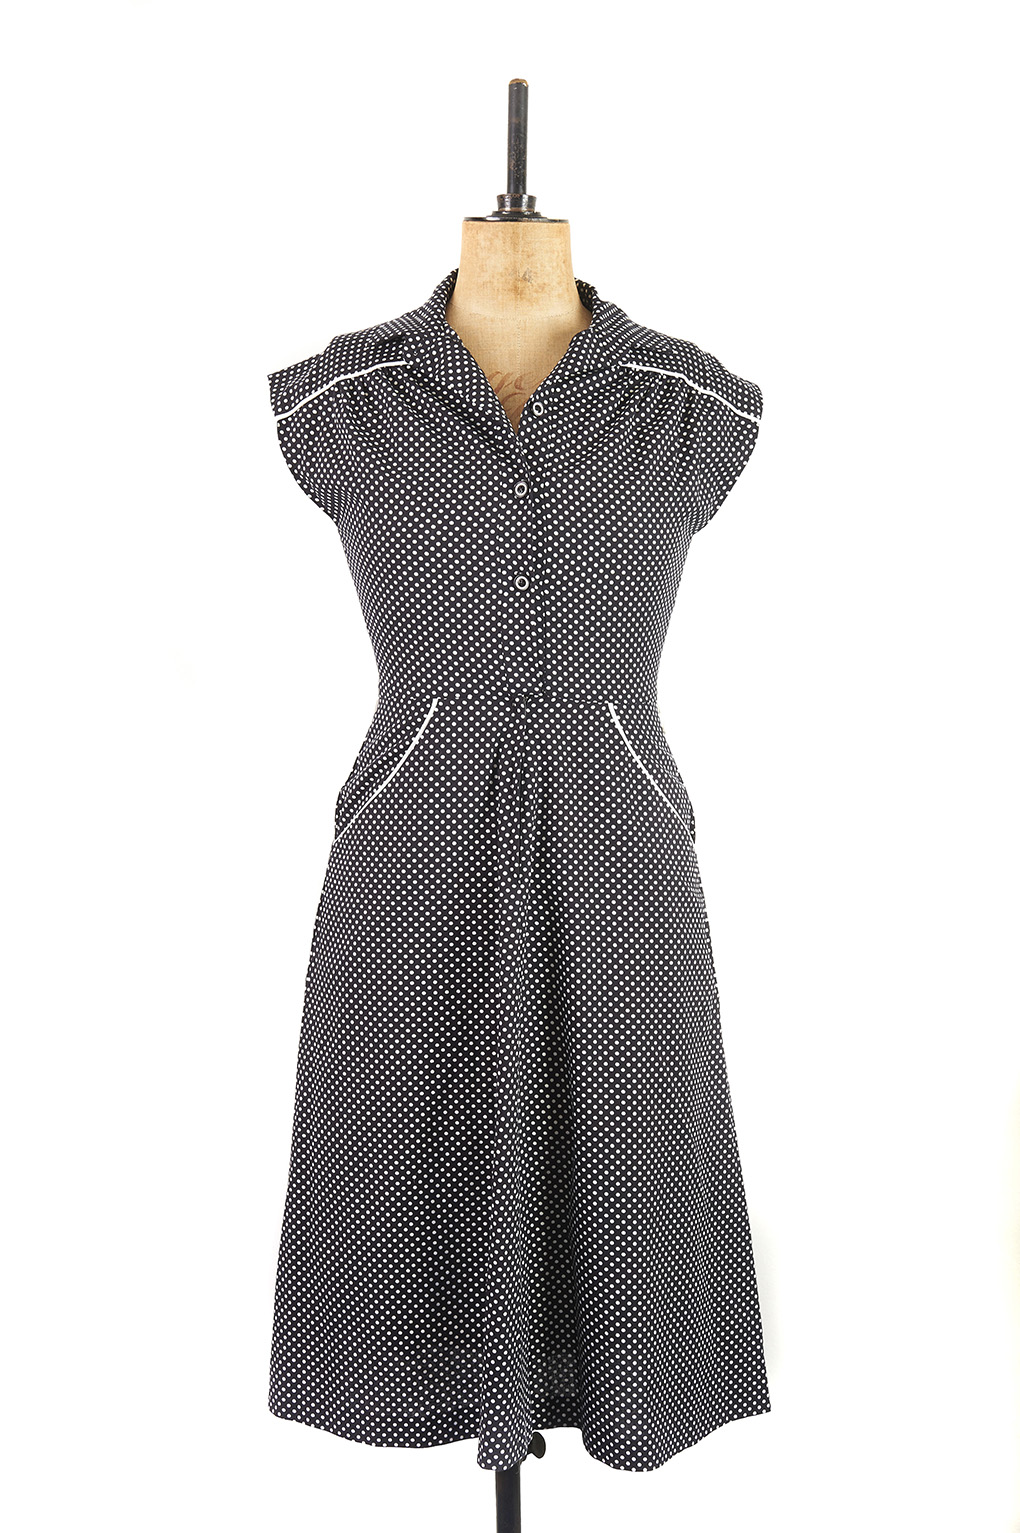 Black and white polka dot cotton vintage dress with fitted waist by Horrockses Fashions c. 1960